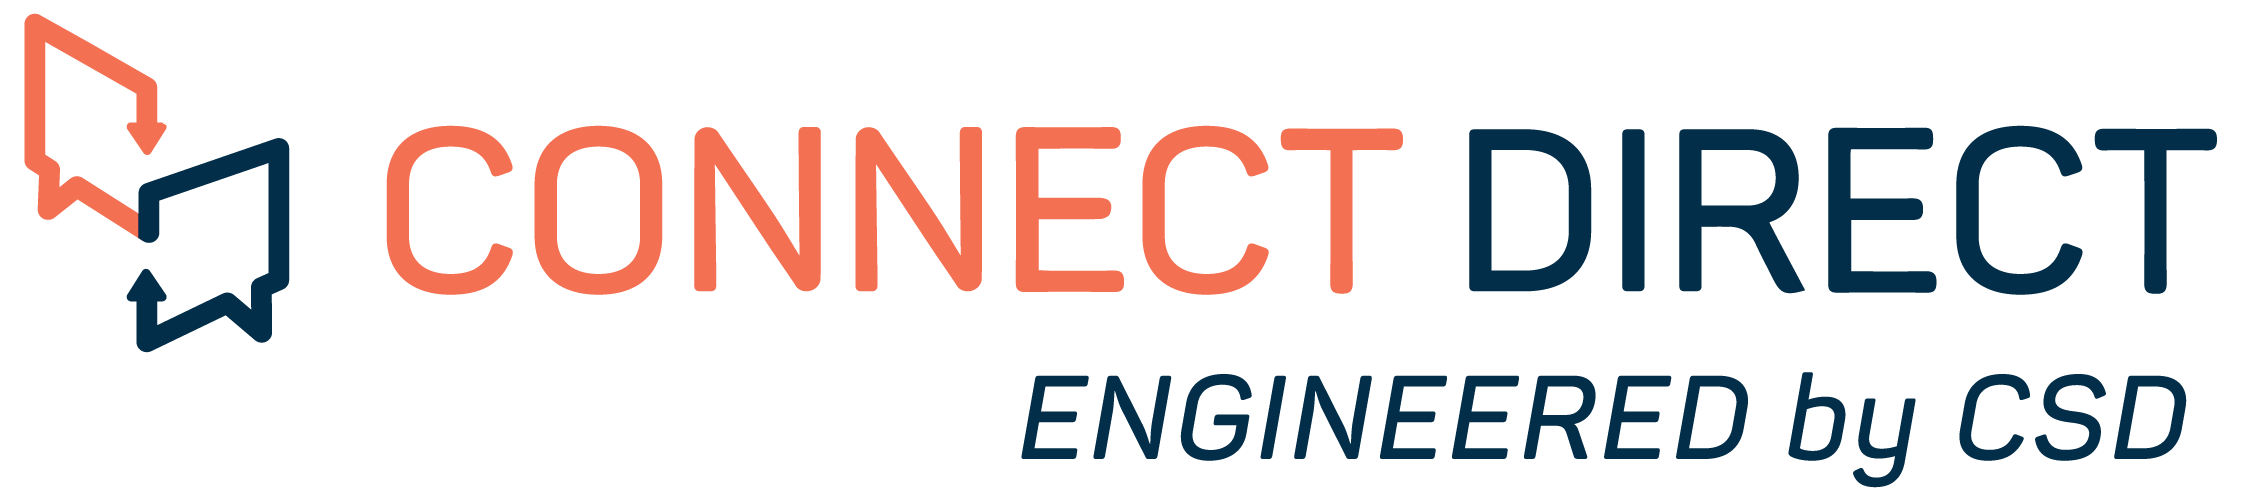 Connect Direct logo